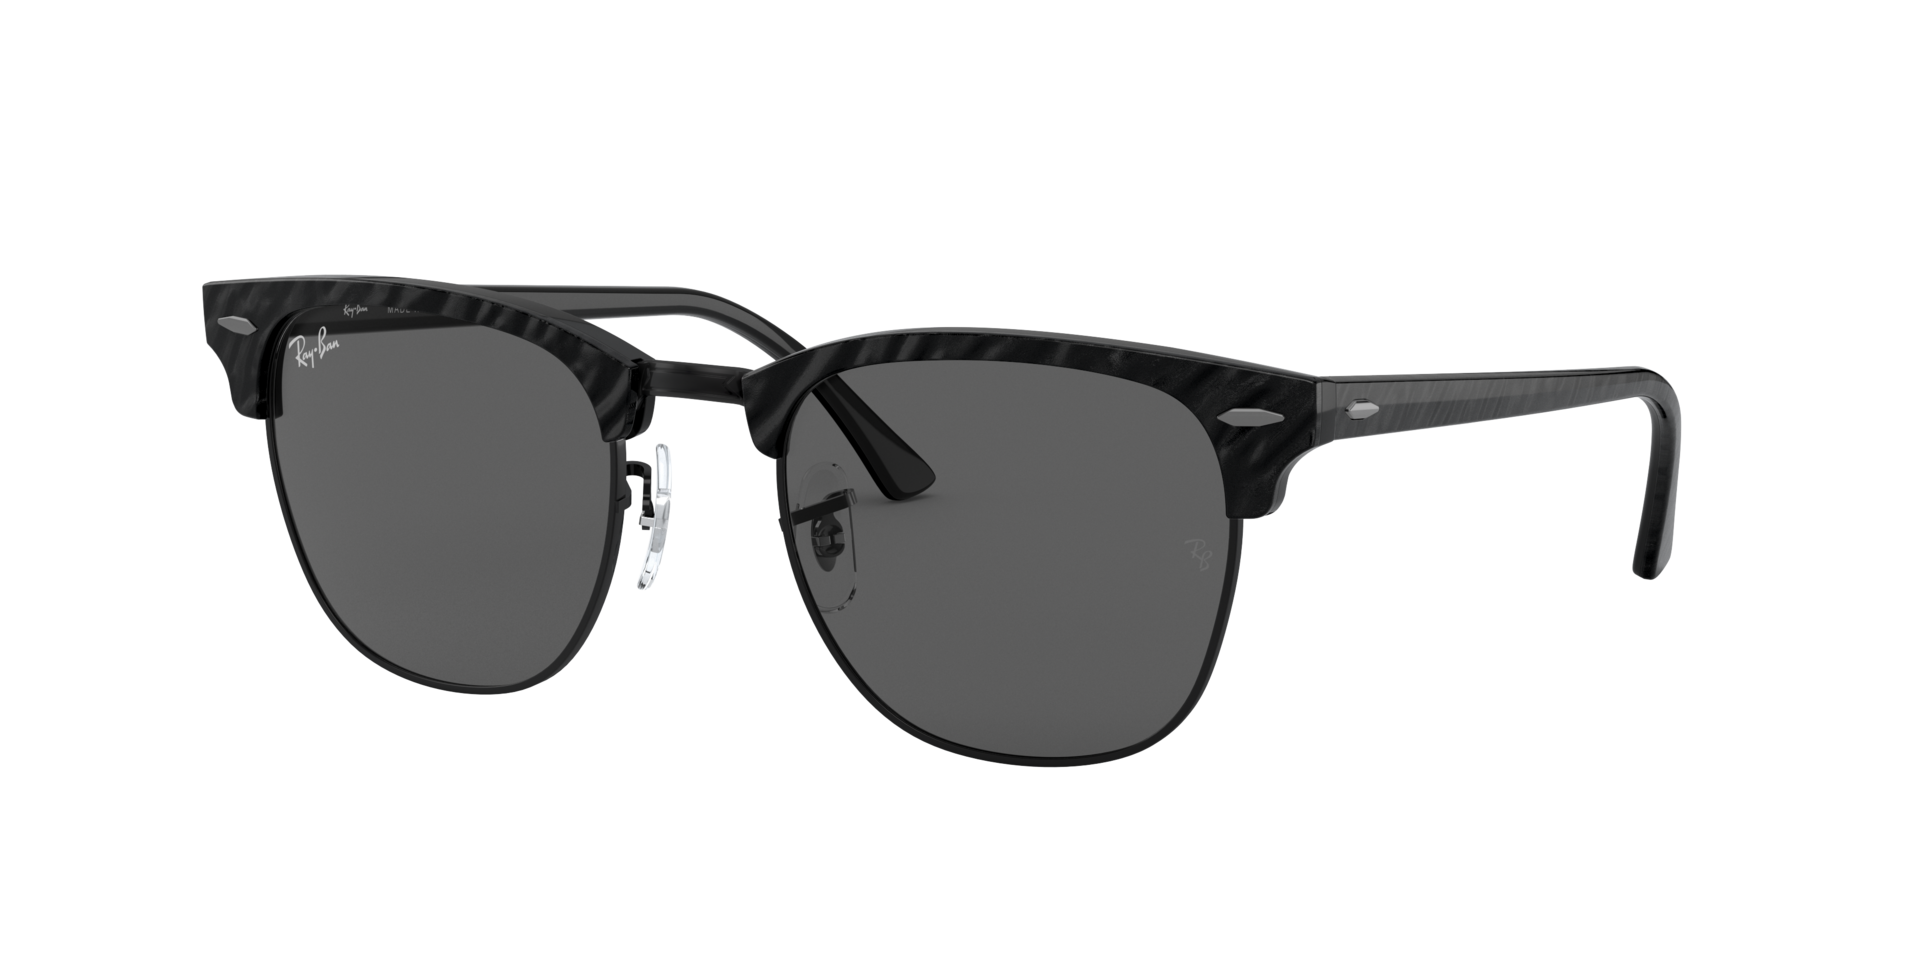 Buy Ray-Ban Clubmaster Sunglasses Online.